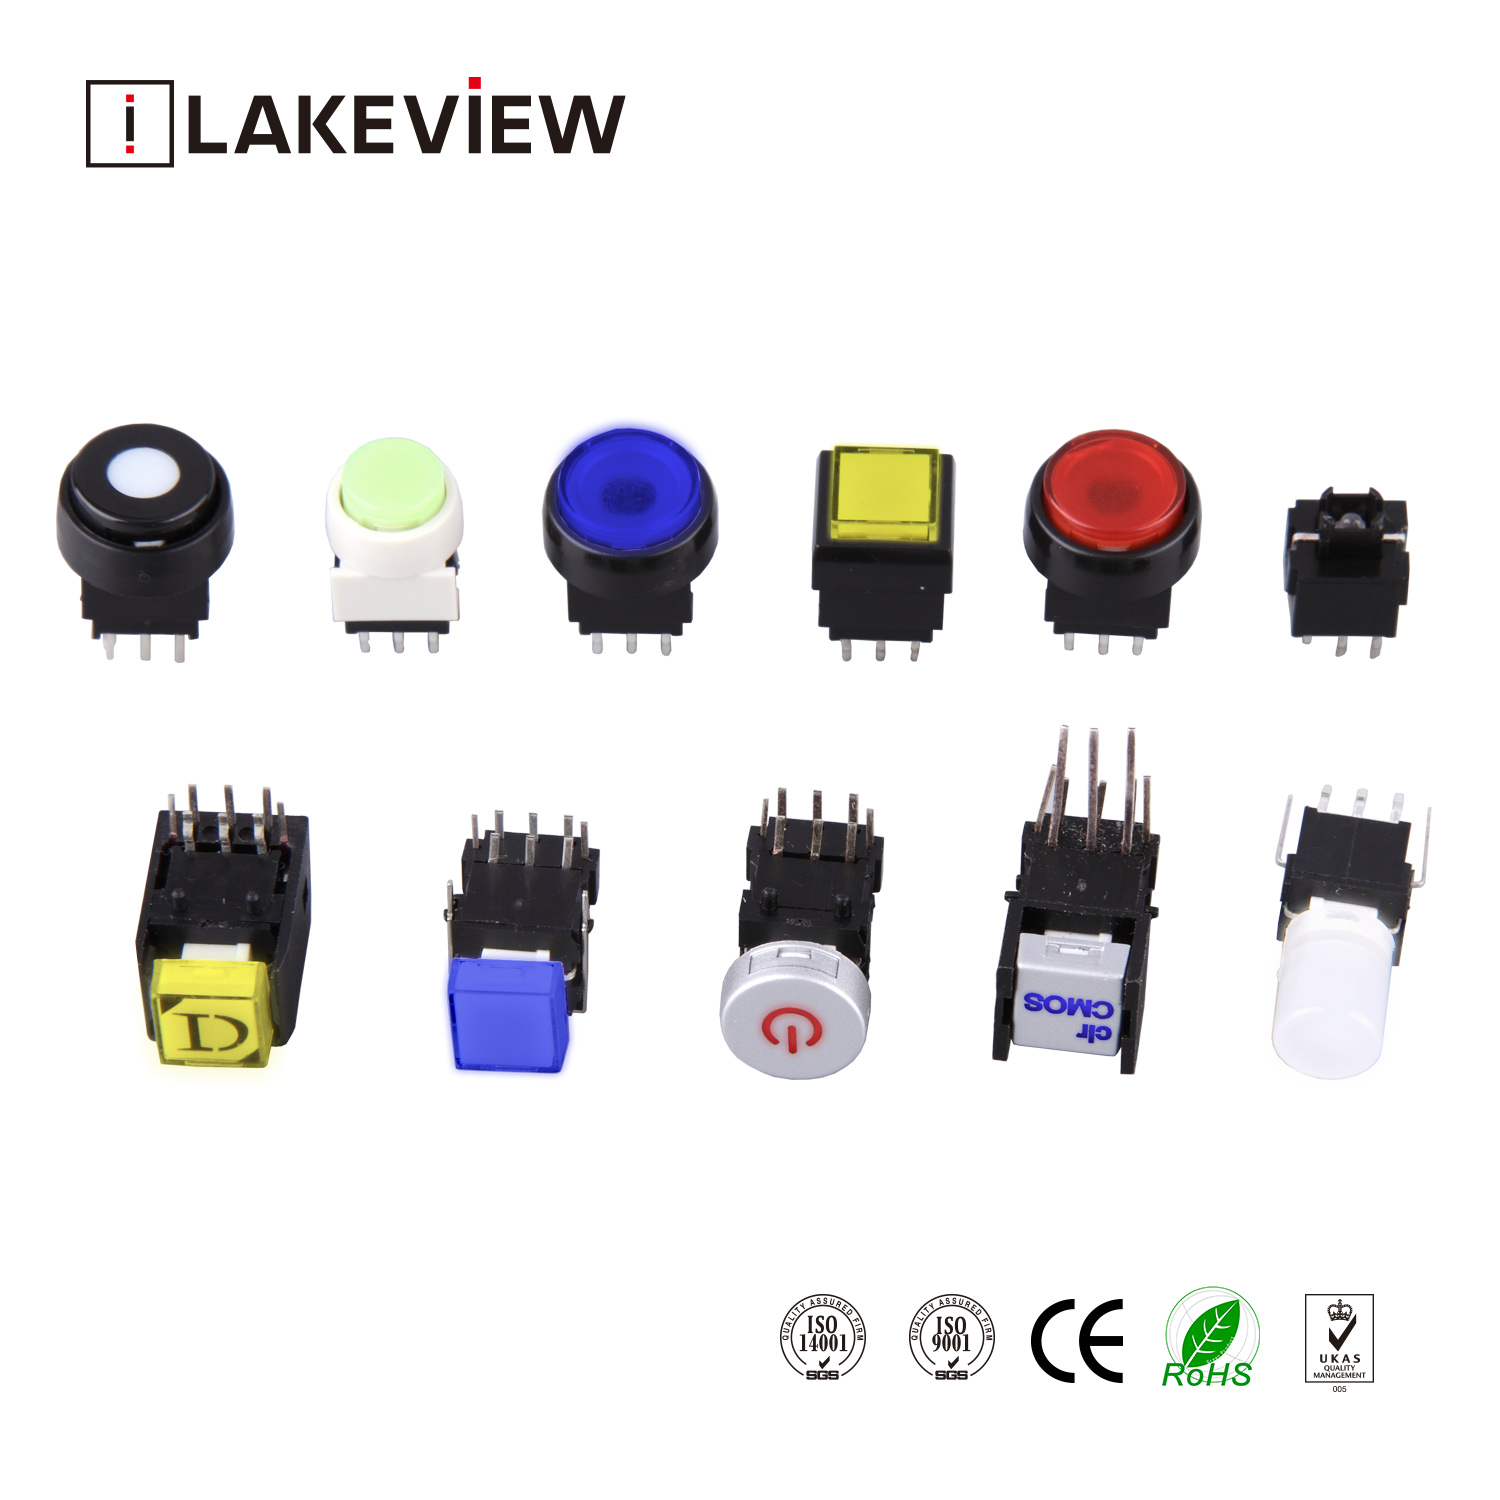 PLA Series Small Push Button Switches